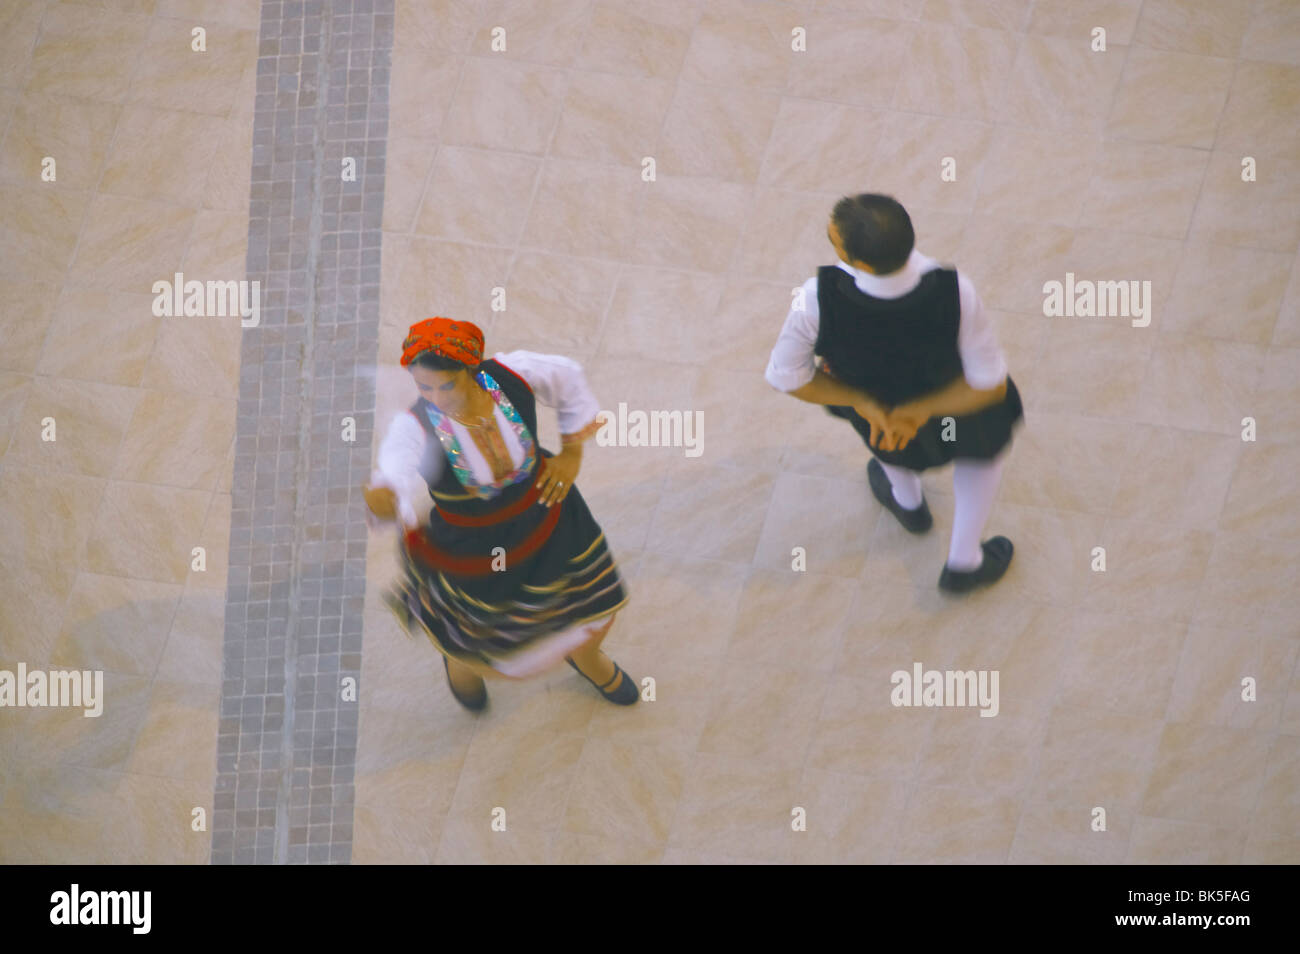 Greek traditional dancing in blurred motion, Greece, Europe Stock Photo